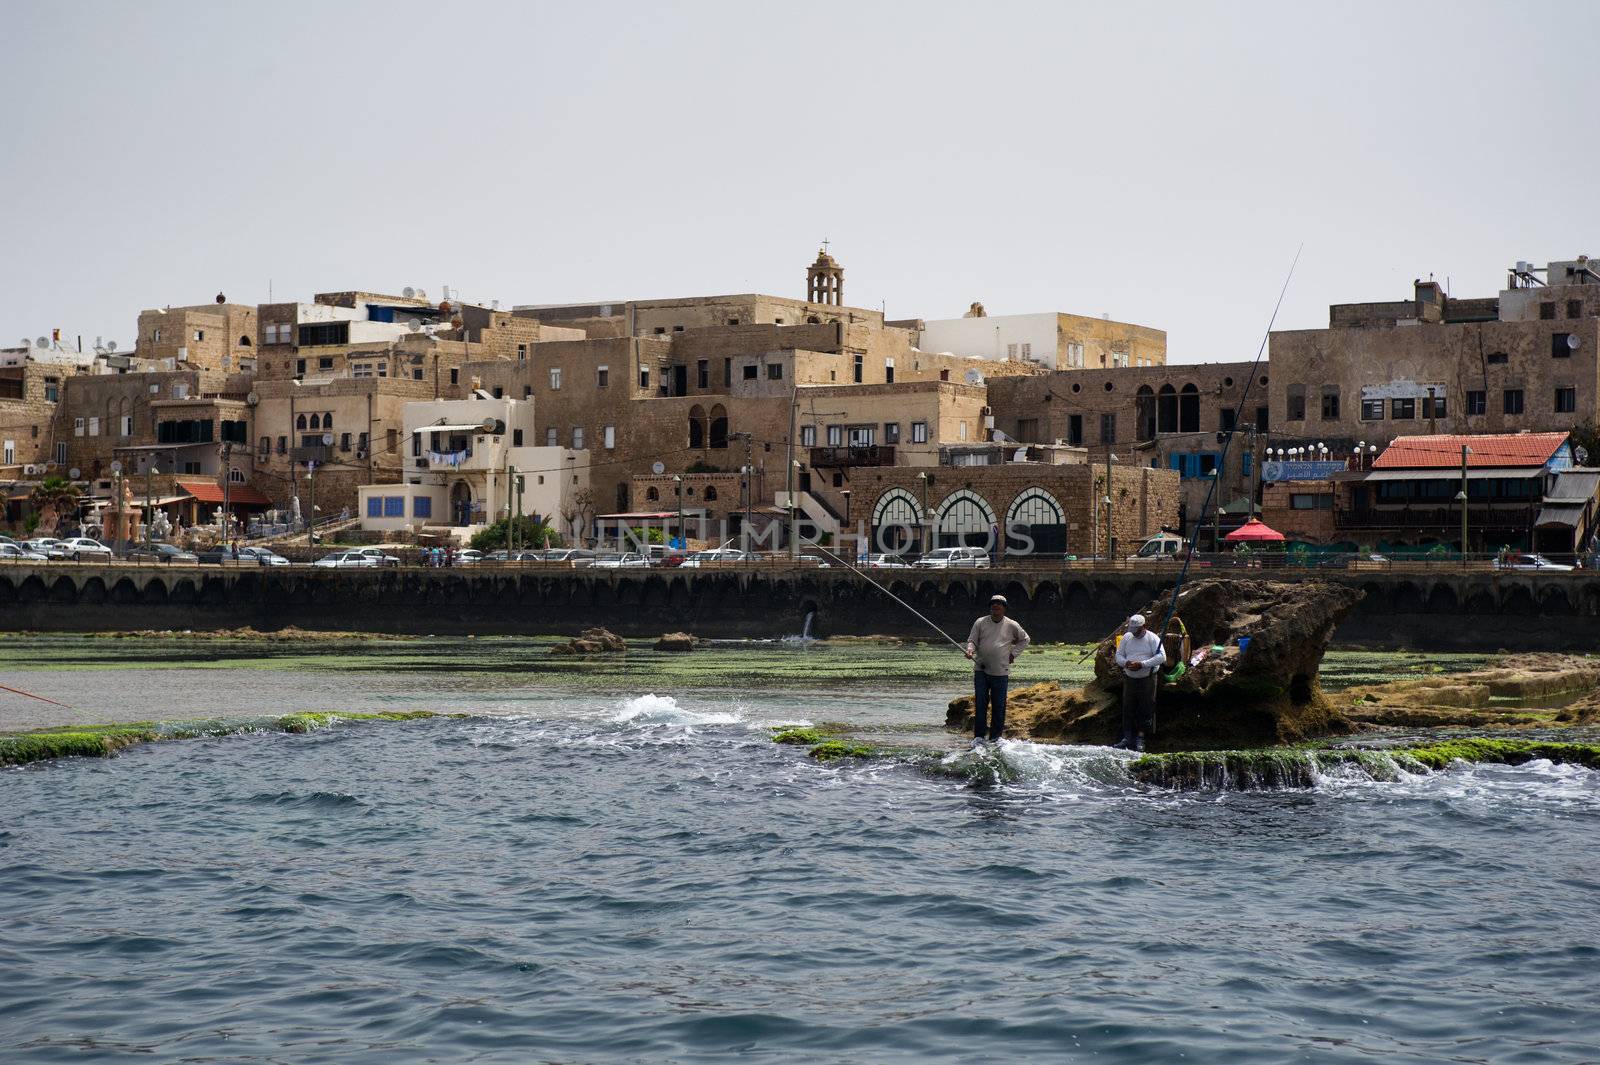 Fishers on the view of ancient crusader fortress in the town of Akko, Israel